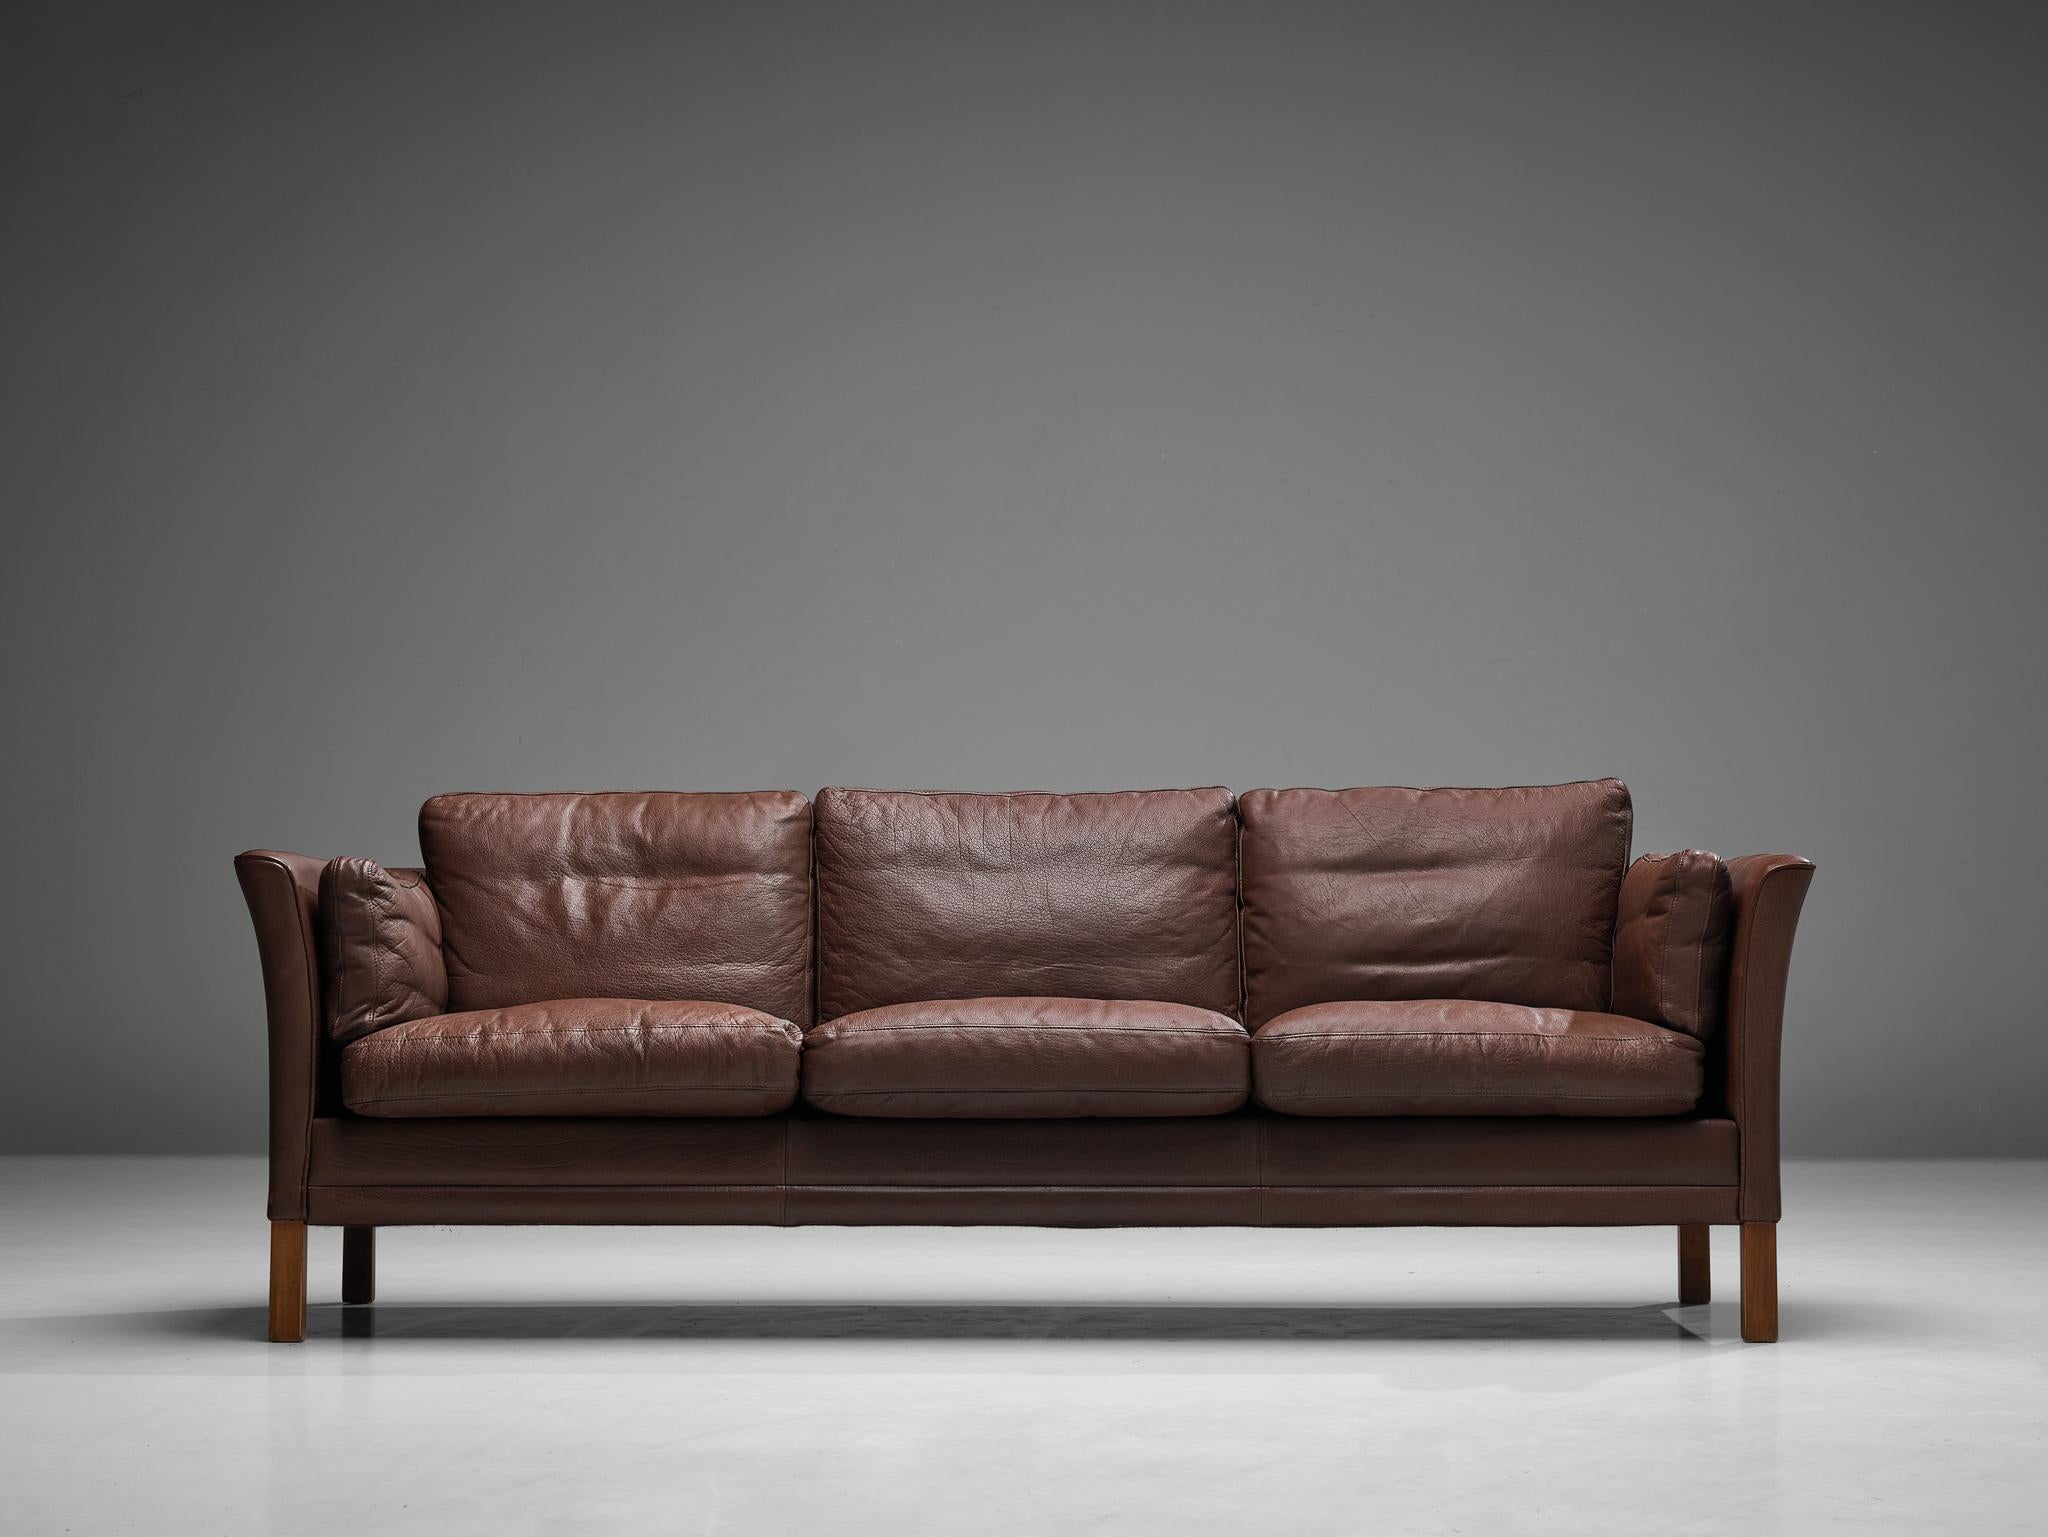 Sofa, leather, wood, Denmark, 1960s

This model reminds of Borge Mogensen's designs. The umber brown leather shows a light patina and is in great condition. The dawn-filled cushions create a comfortable seat. Three seats offer plenty of place to